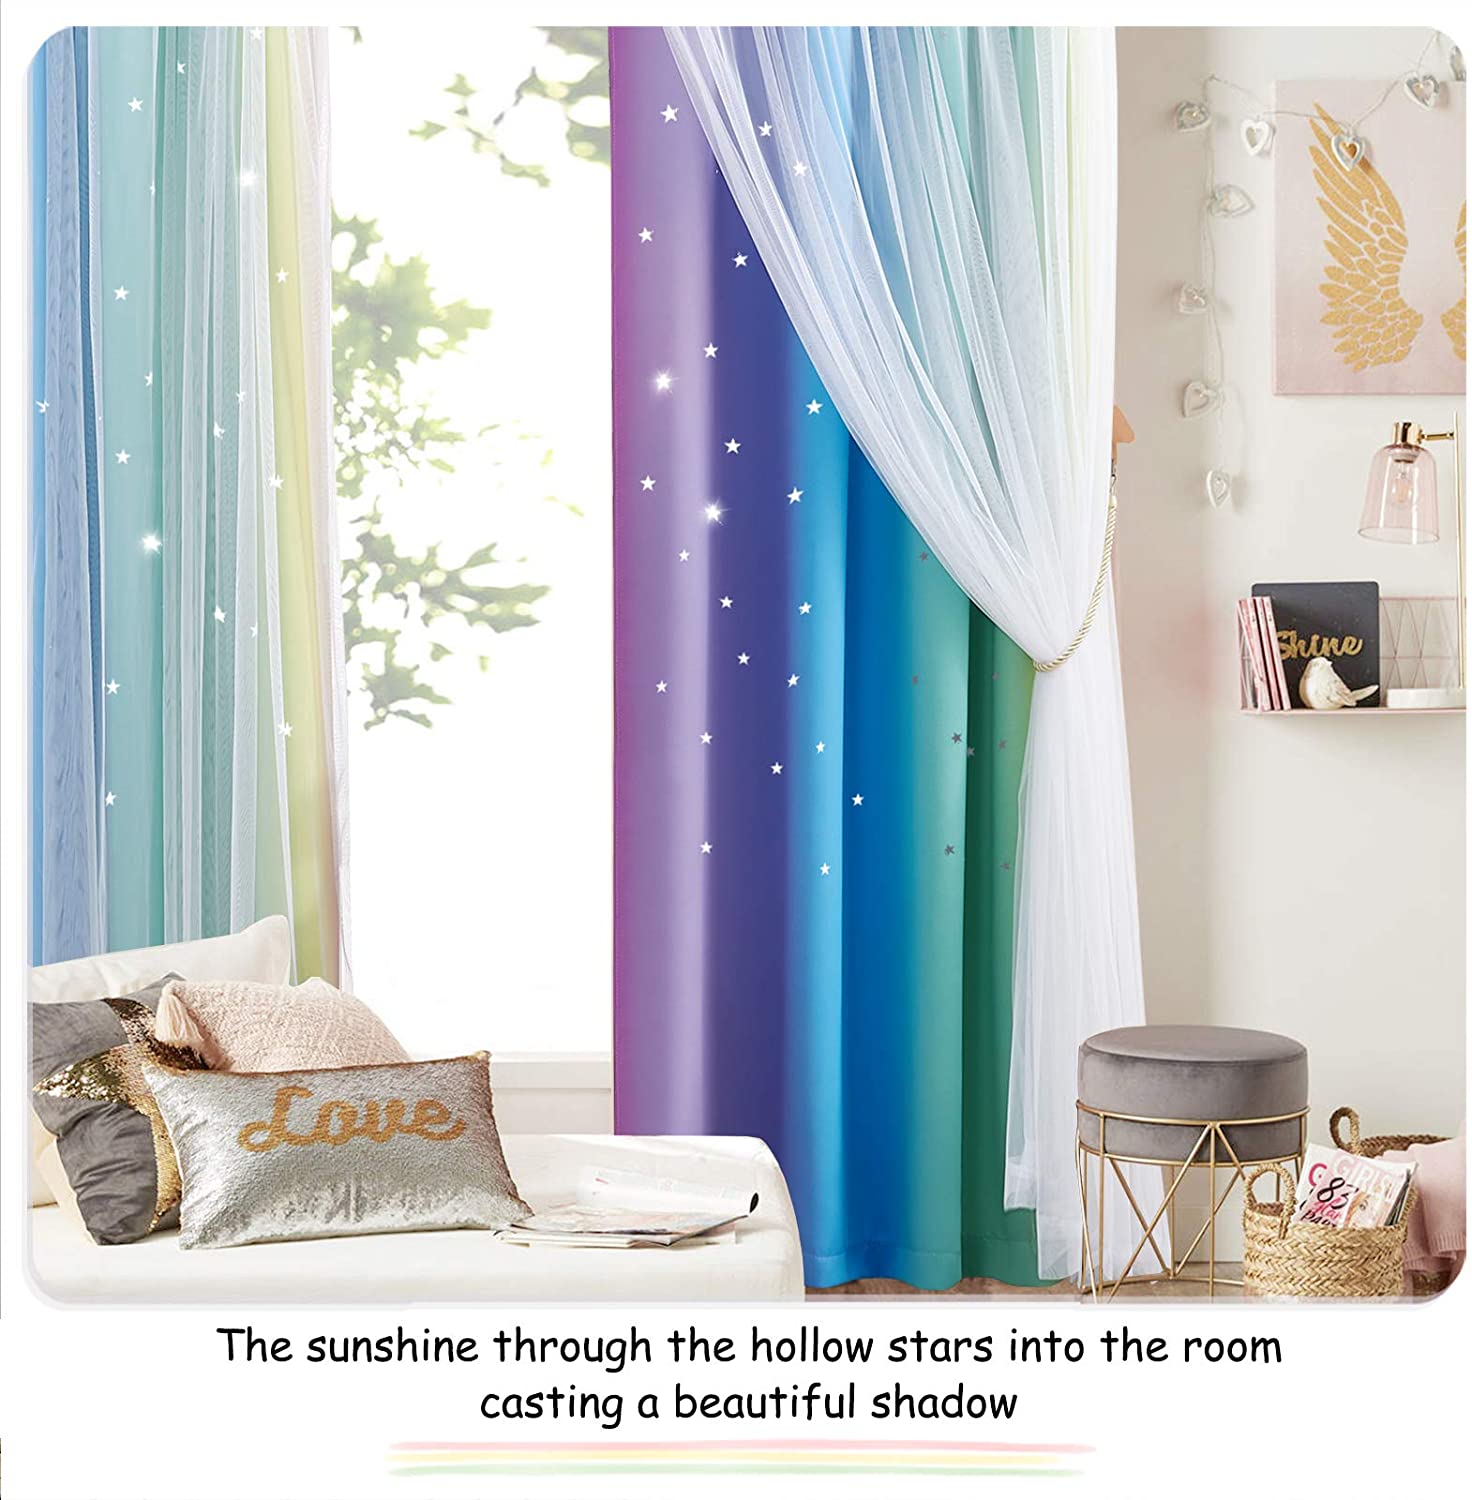 Star Cut Out Blackout Curtains With Sheer Curtain Overlay 1 Panel KGORGE Store